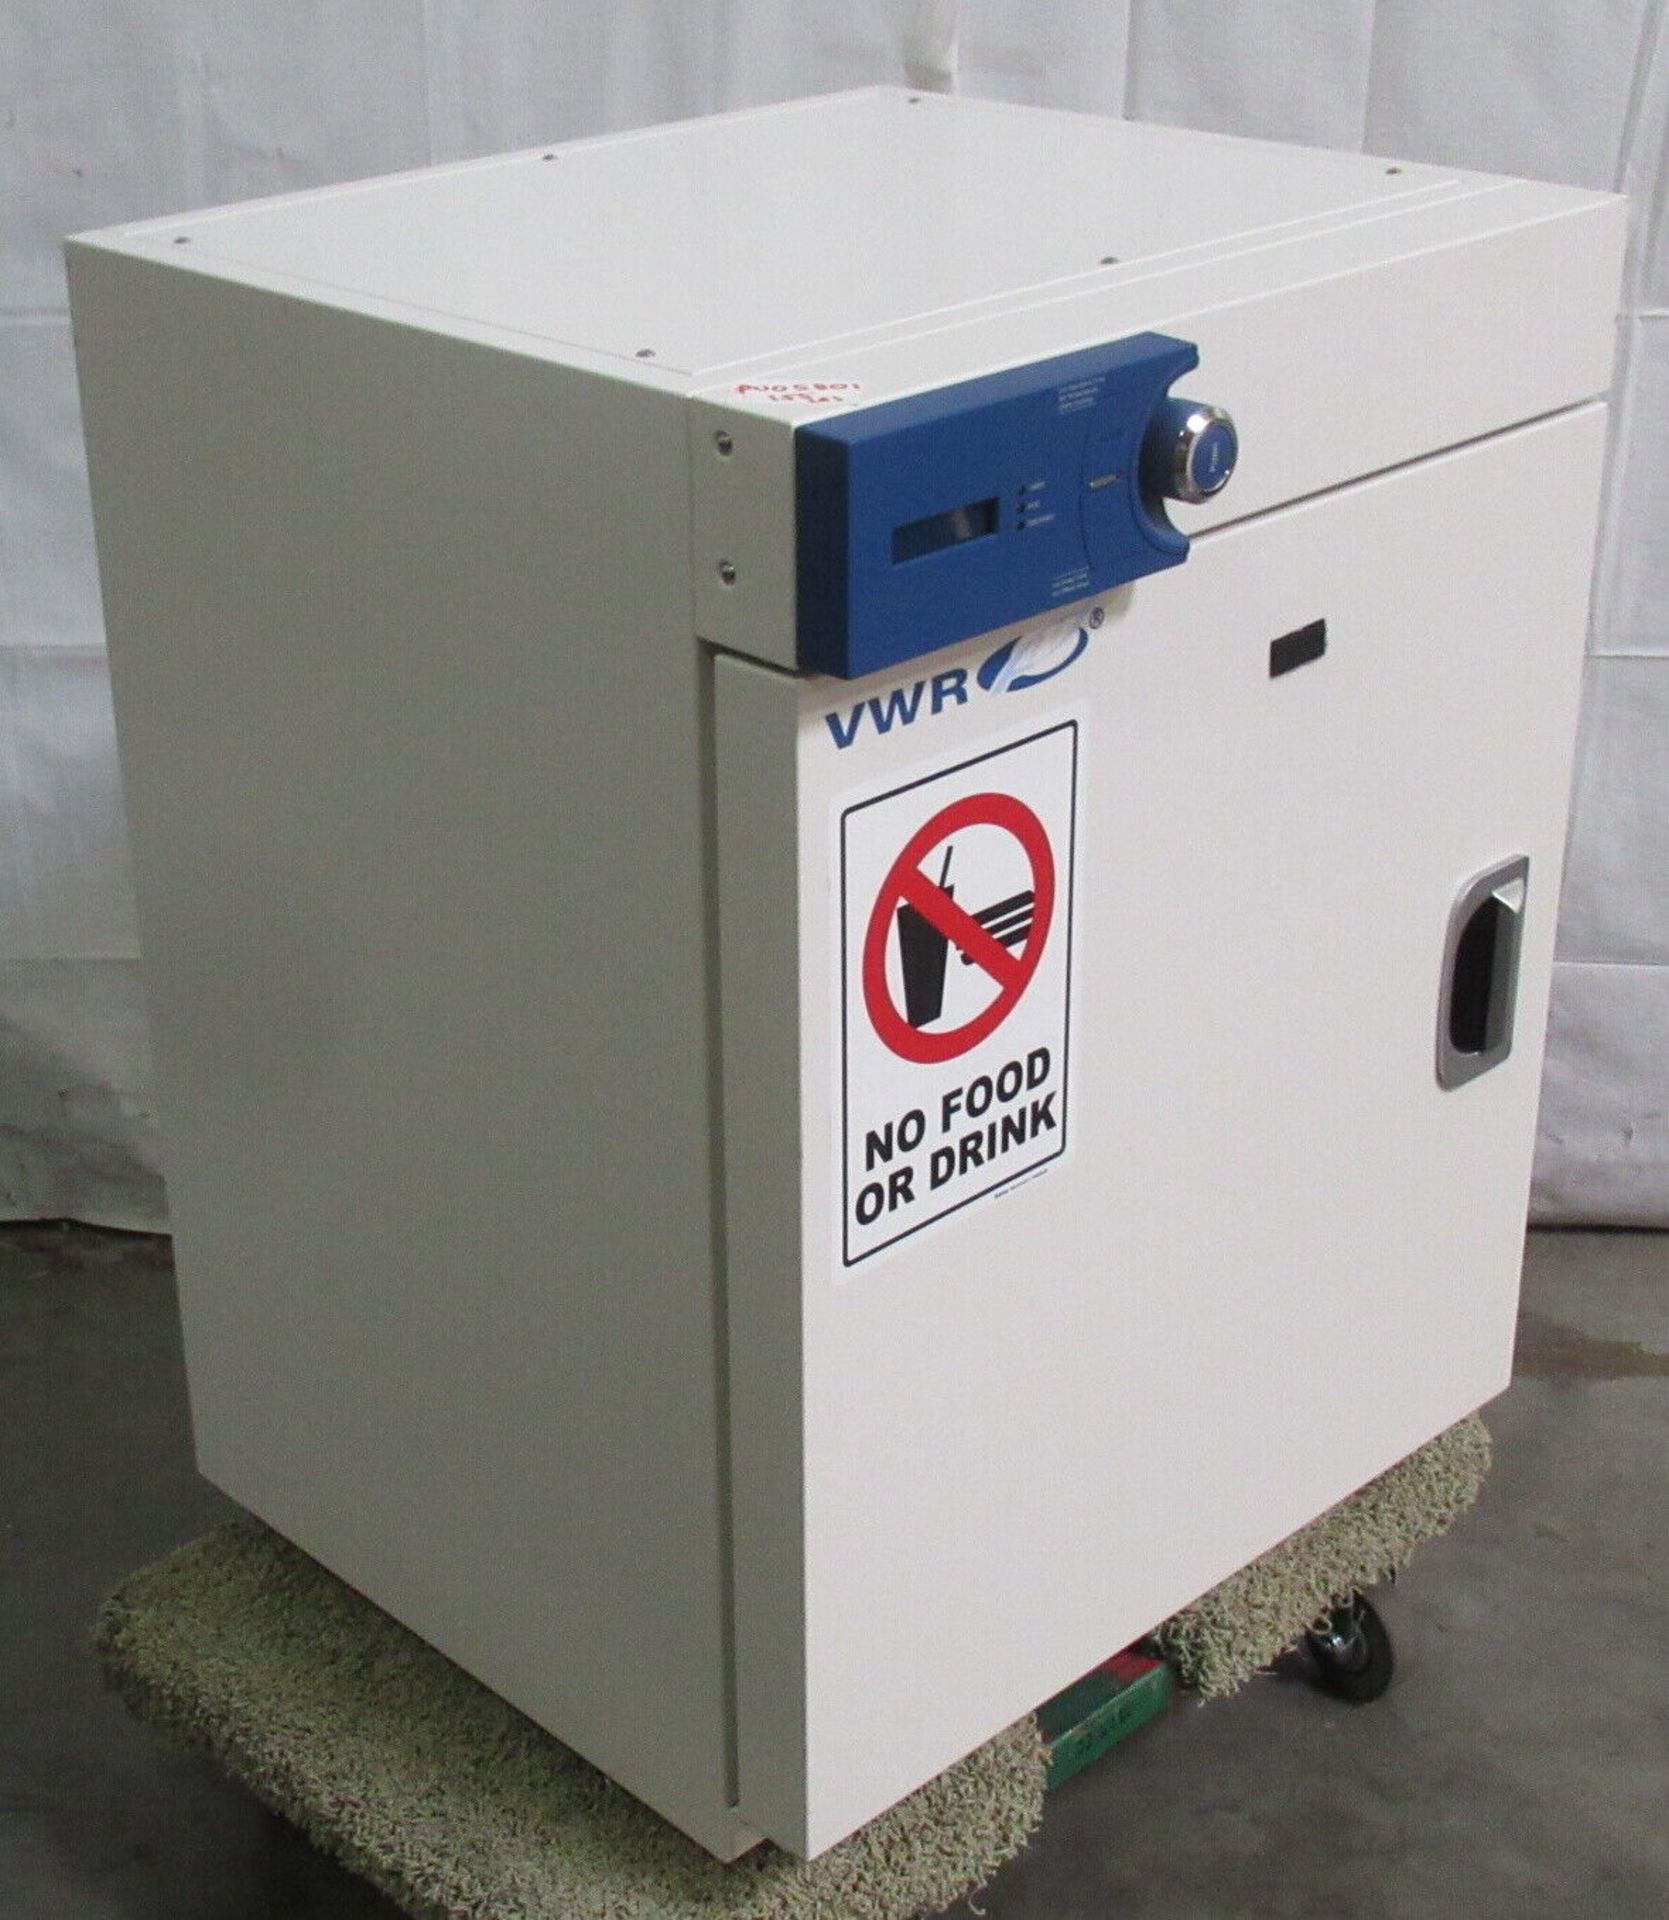 VWR 414005-132 Gravity Convection General Incubator - Image 5 of 8